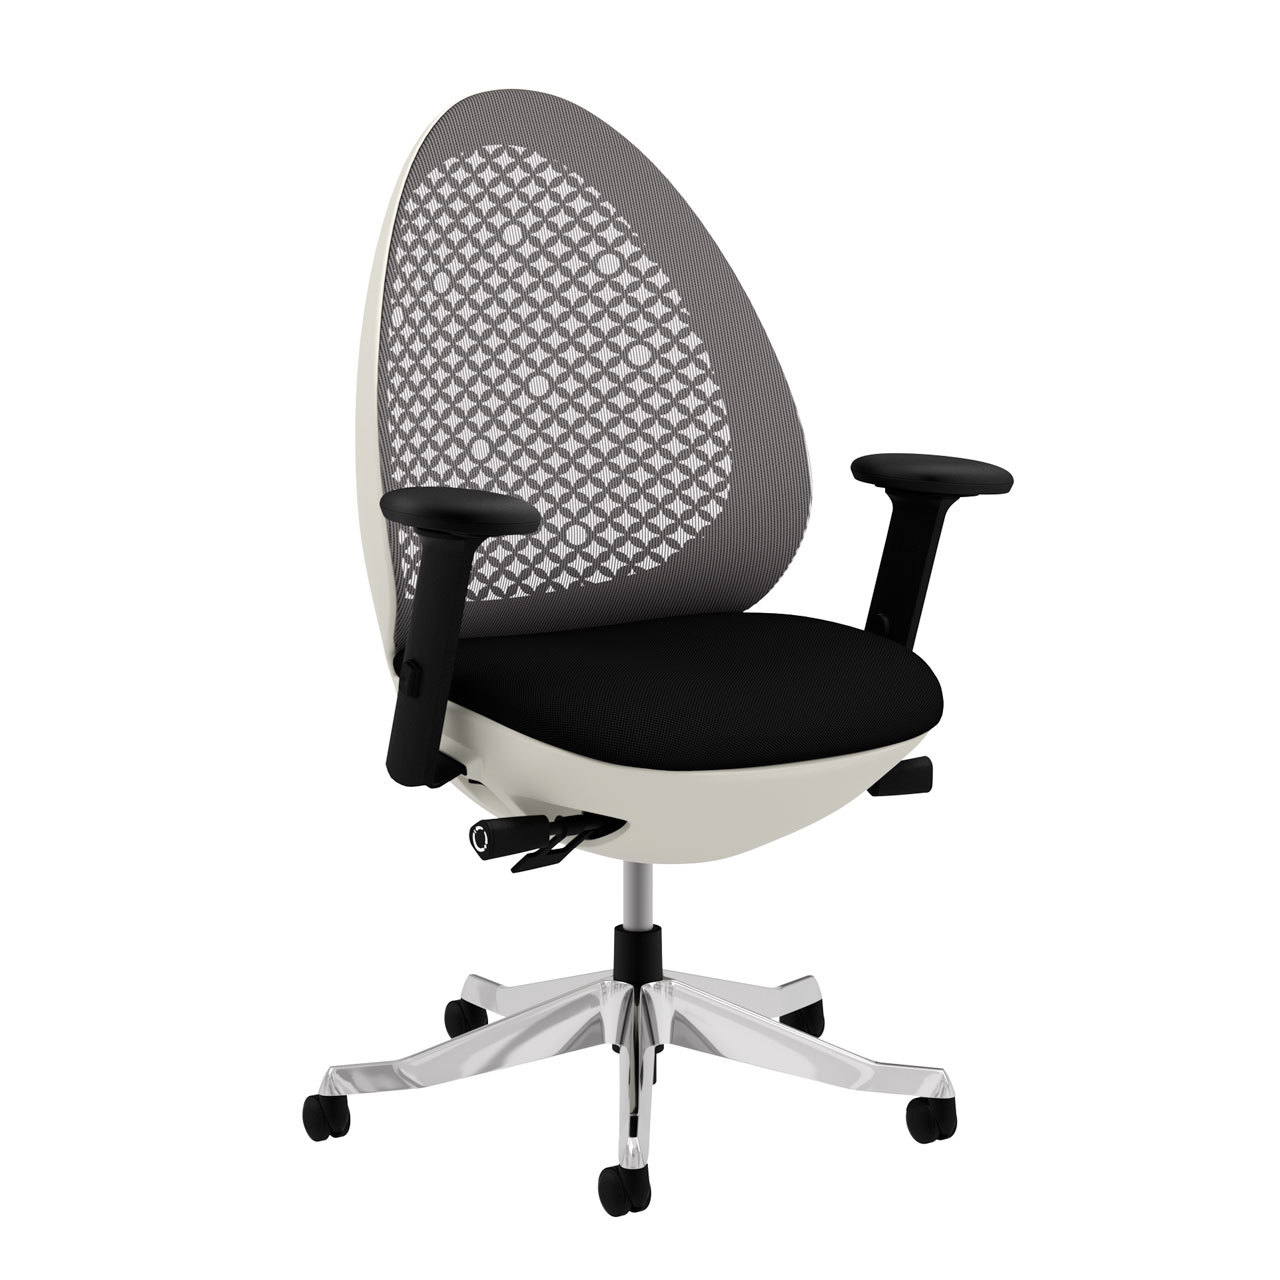 Cubicle Furniture from Compel - Ovo task chair